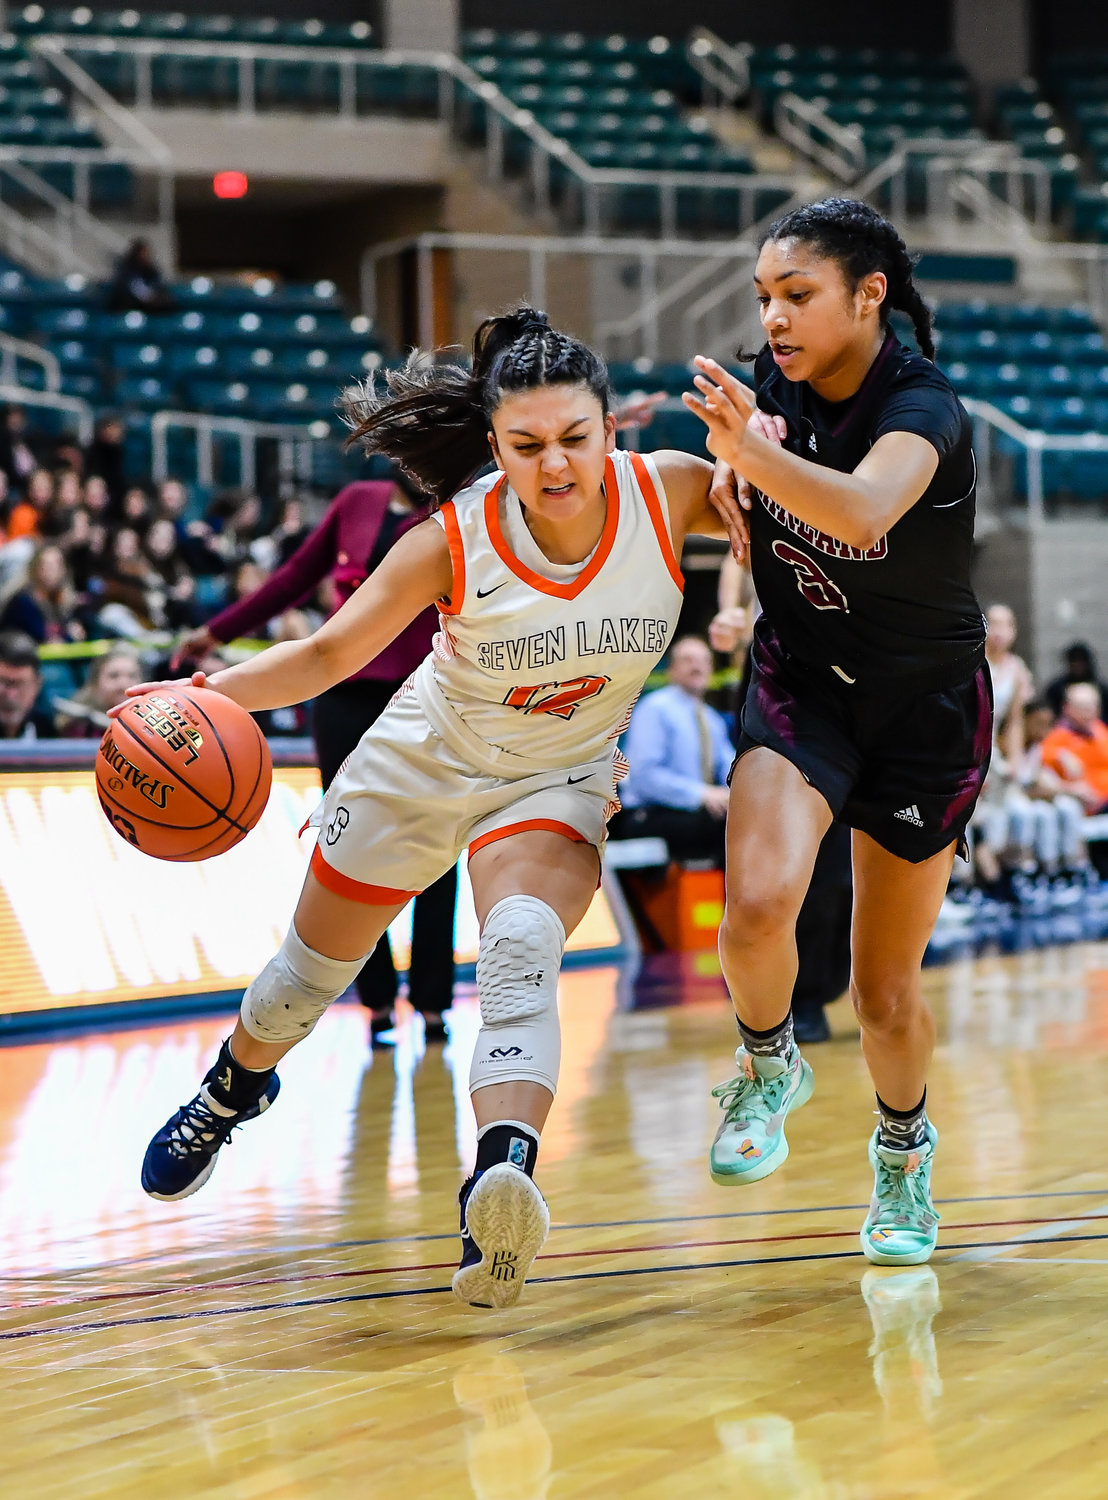 Katy Tx. Feb 25, 2022:  Seven Lakes Cailyn Tucker #12 drives to the basket during the Regional SemiFinal playoff game, Seven Lakes vs Pearland at the Merrell Center. (Photo by Mark Goodman / Katy Times)